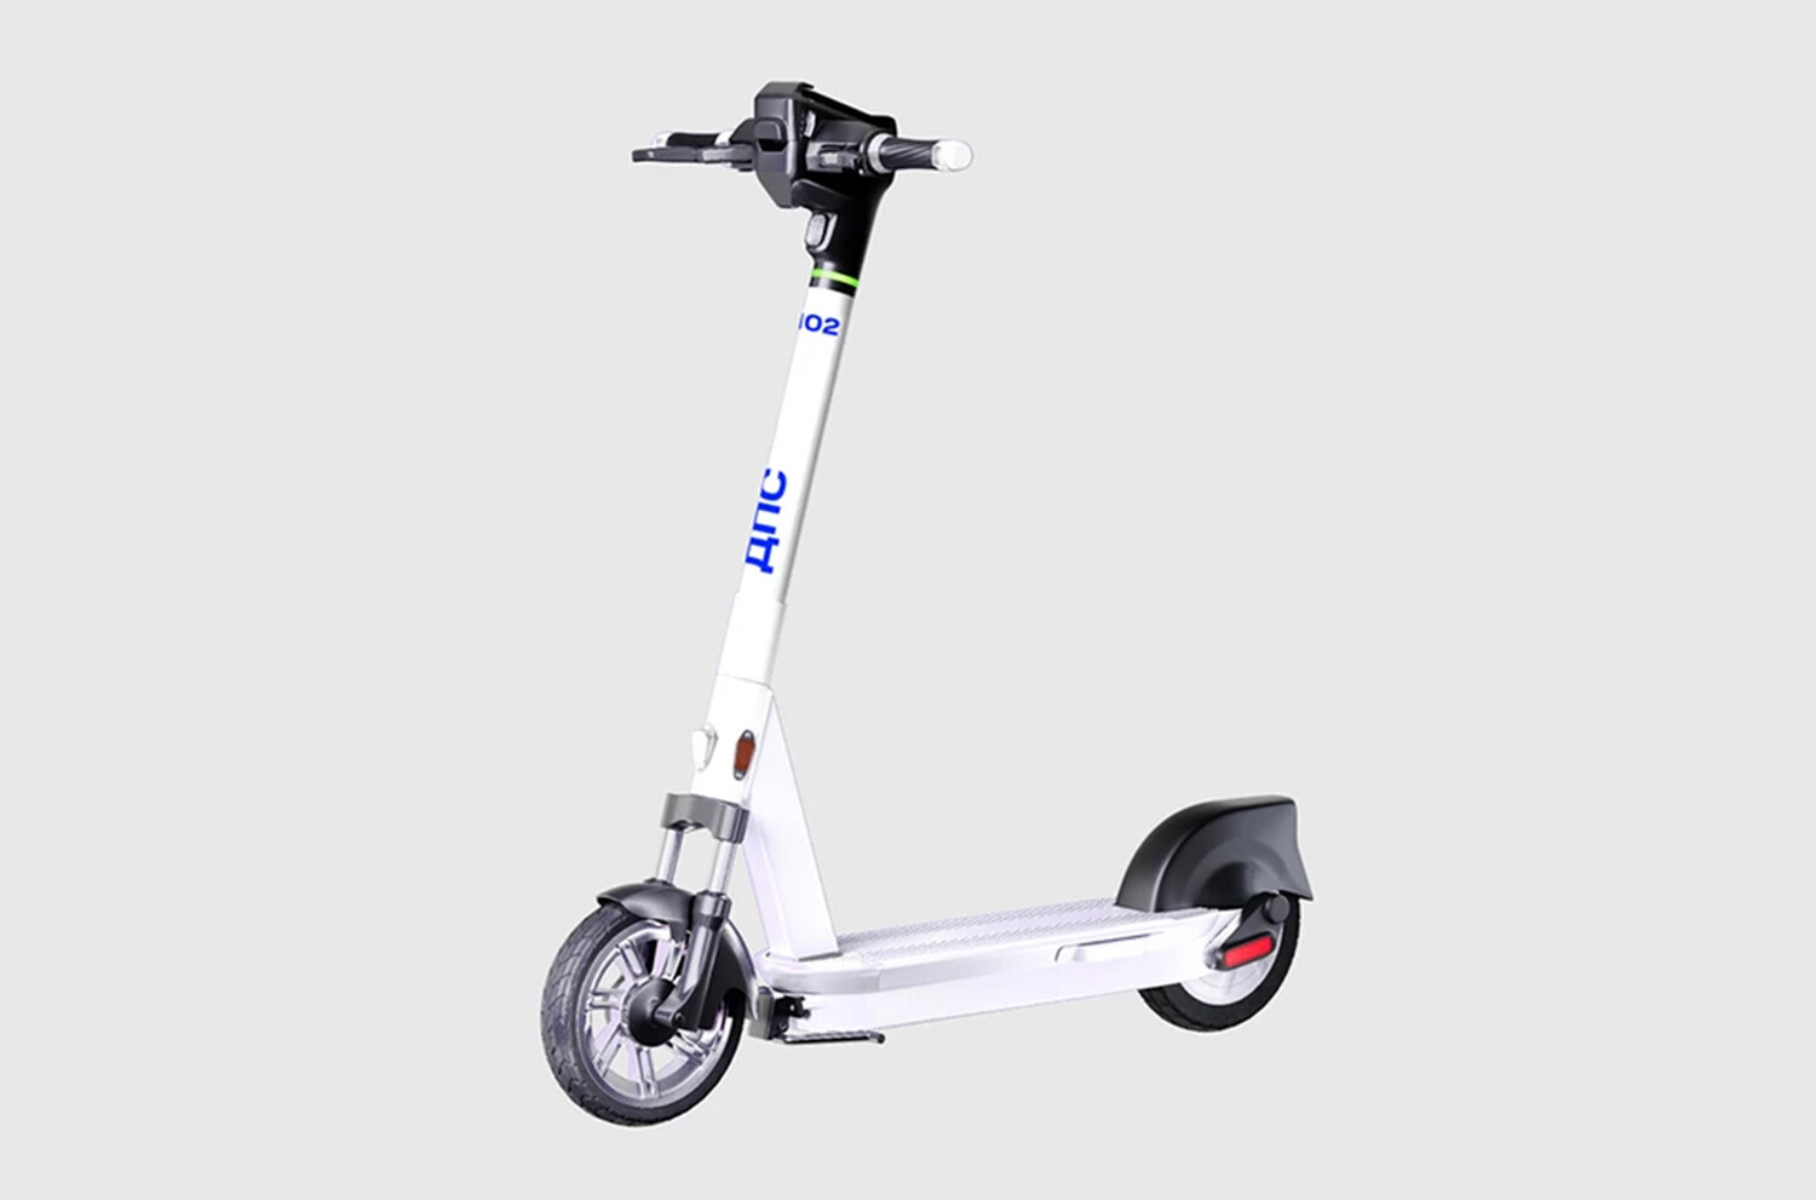 Russia Makes Electric Scooter for Police